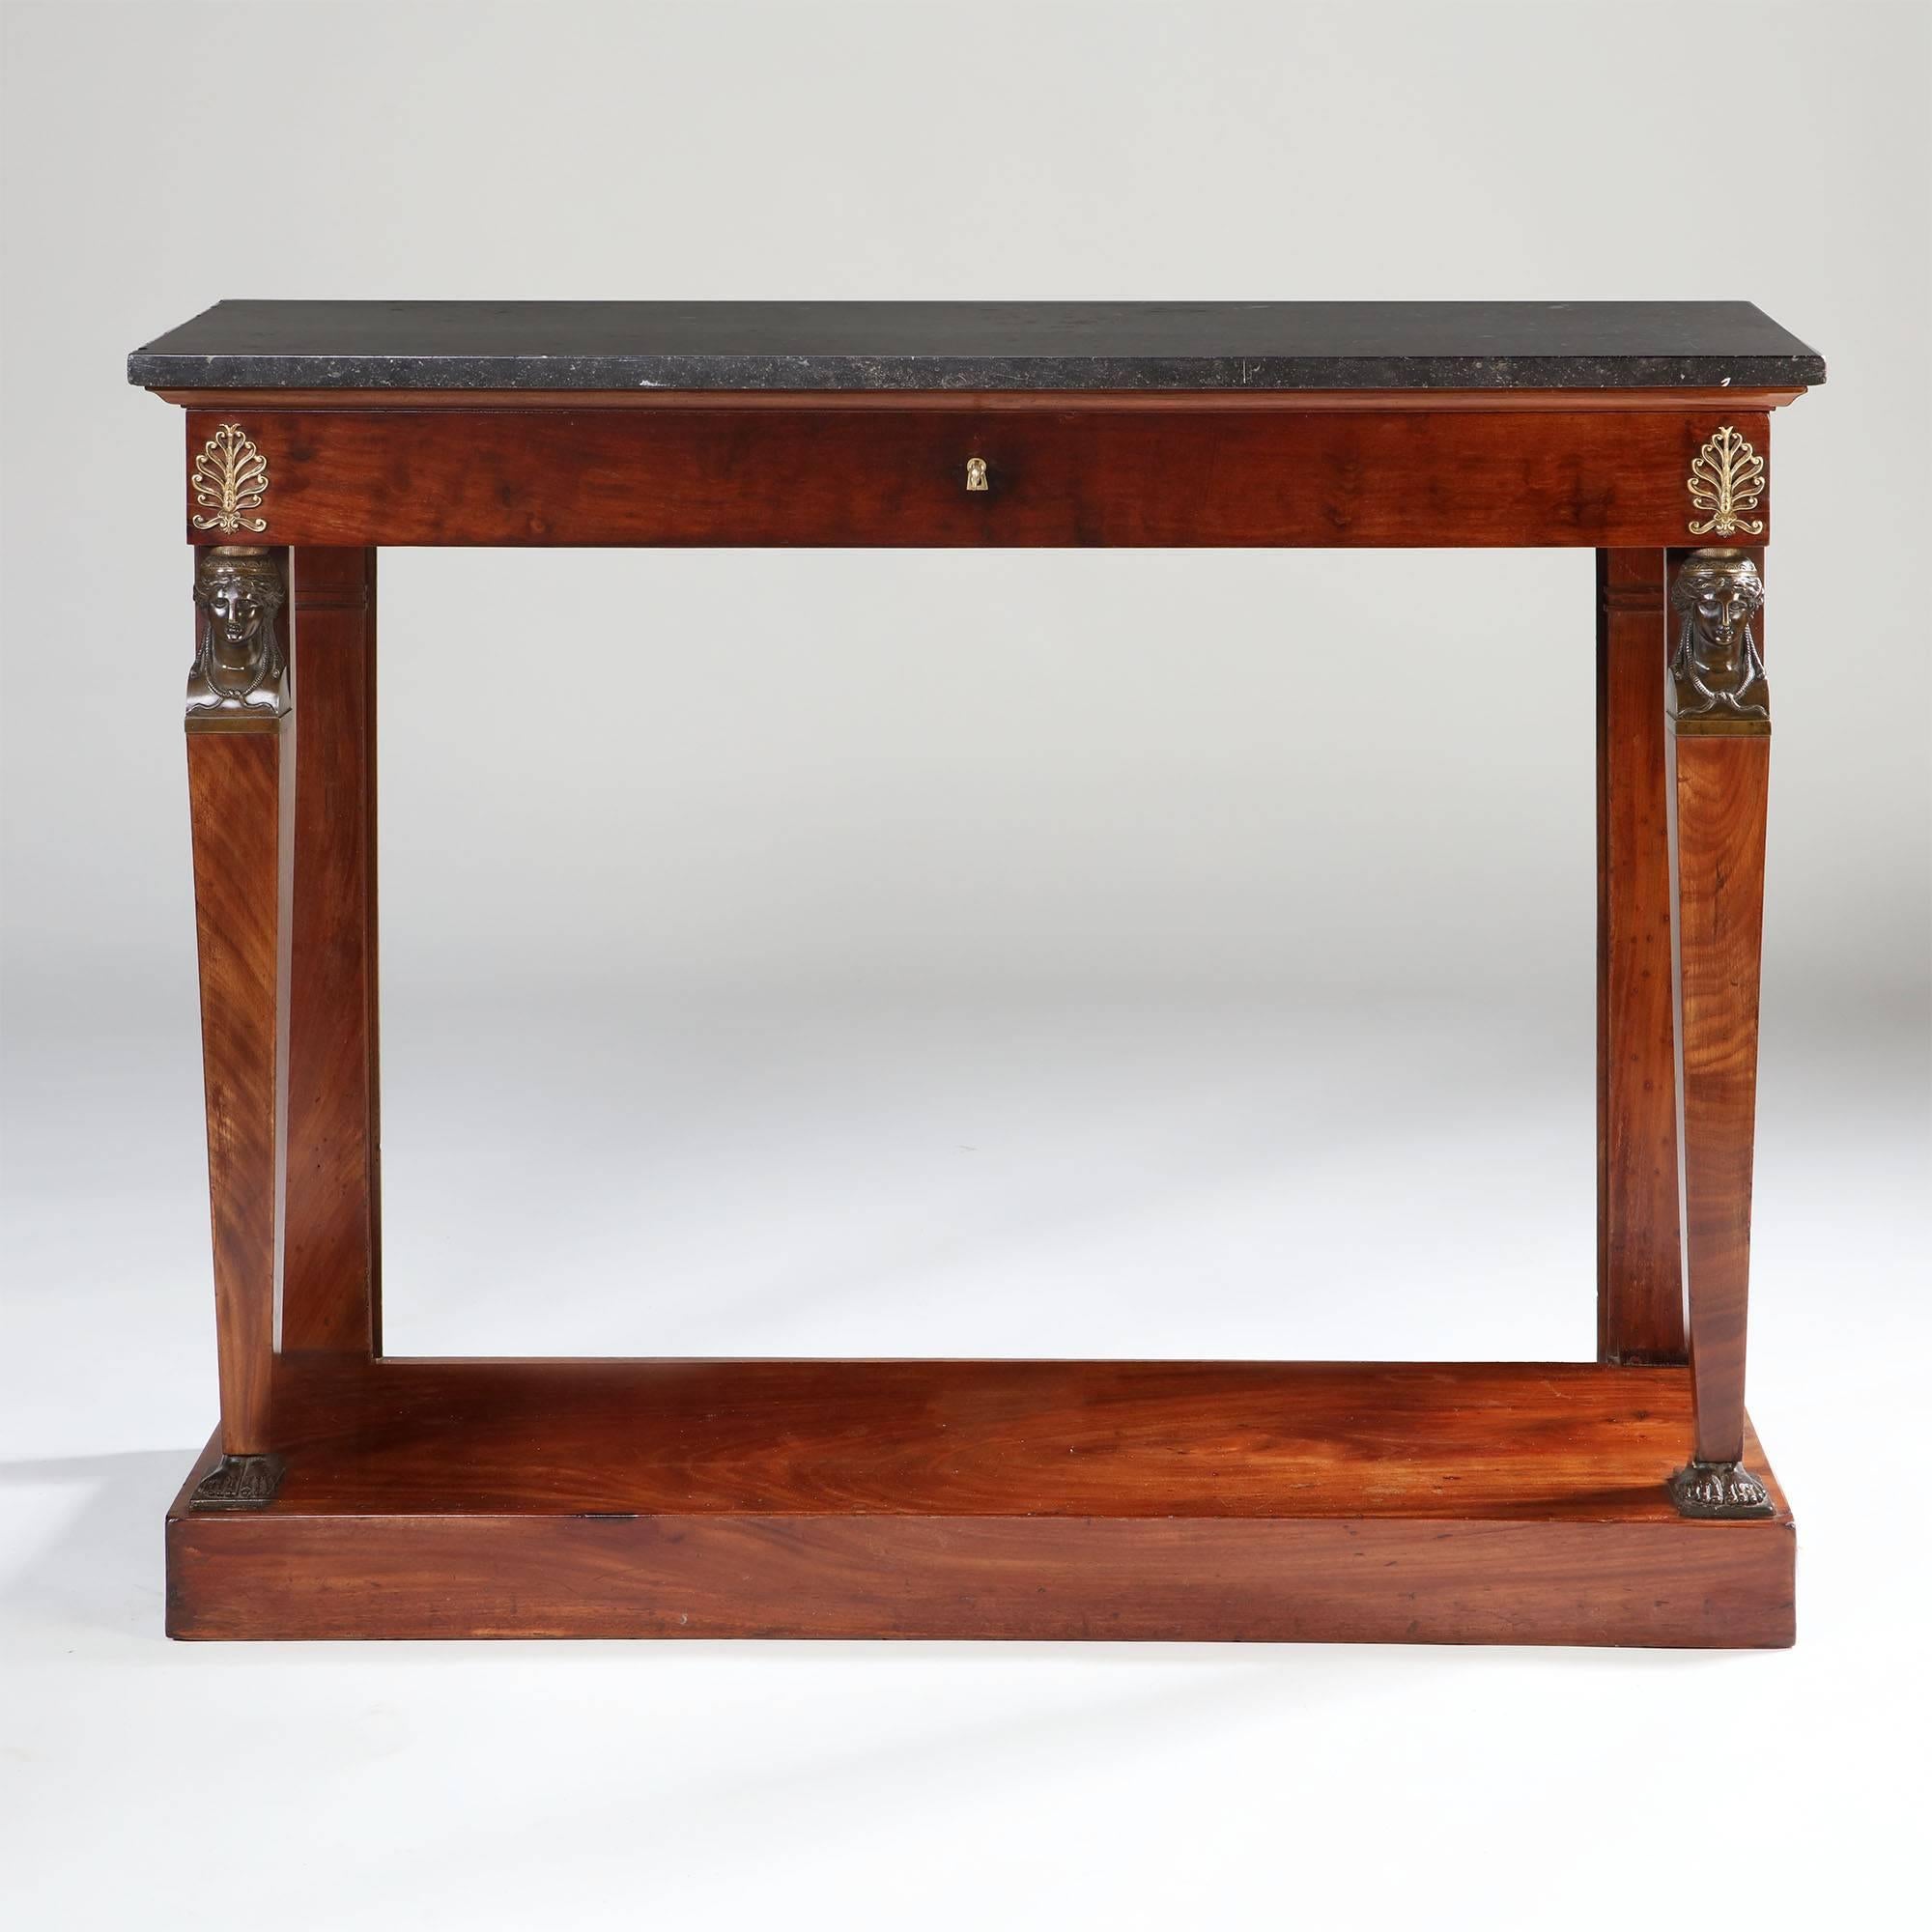 A fine mahogany Empire console table, with a single drawer to the frieze, original marble top, and bronze caryatids to the uprights.